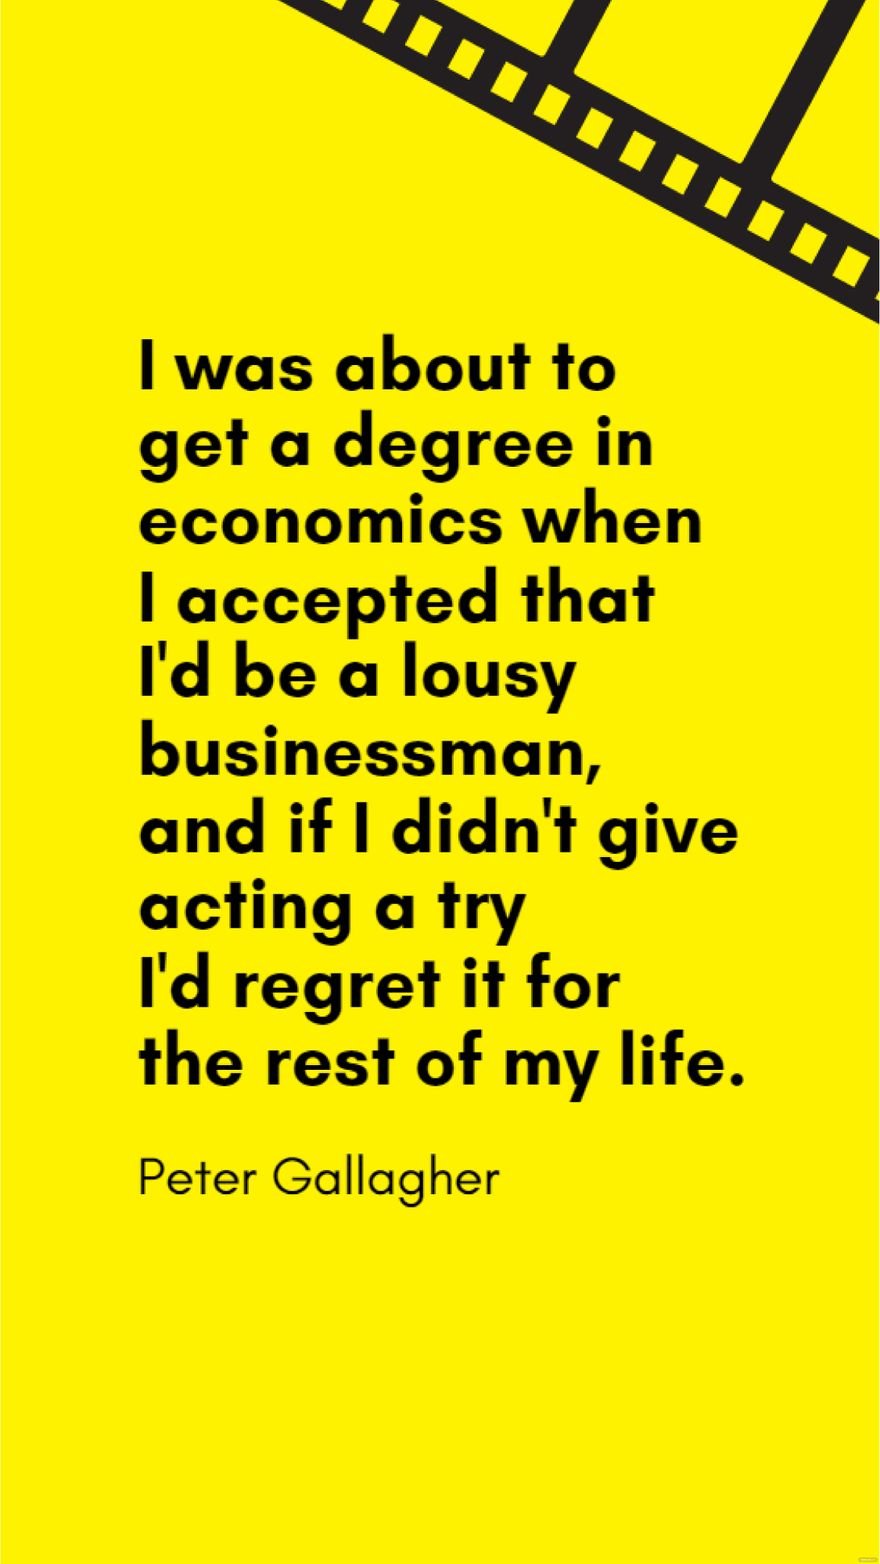 Peter Gallagher - I was about to get a degree in economics when I accepted that I'd be a lousy businessman, and if I didn't give acting a try I'd regret it for the rest of my life.